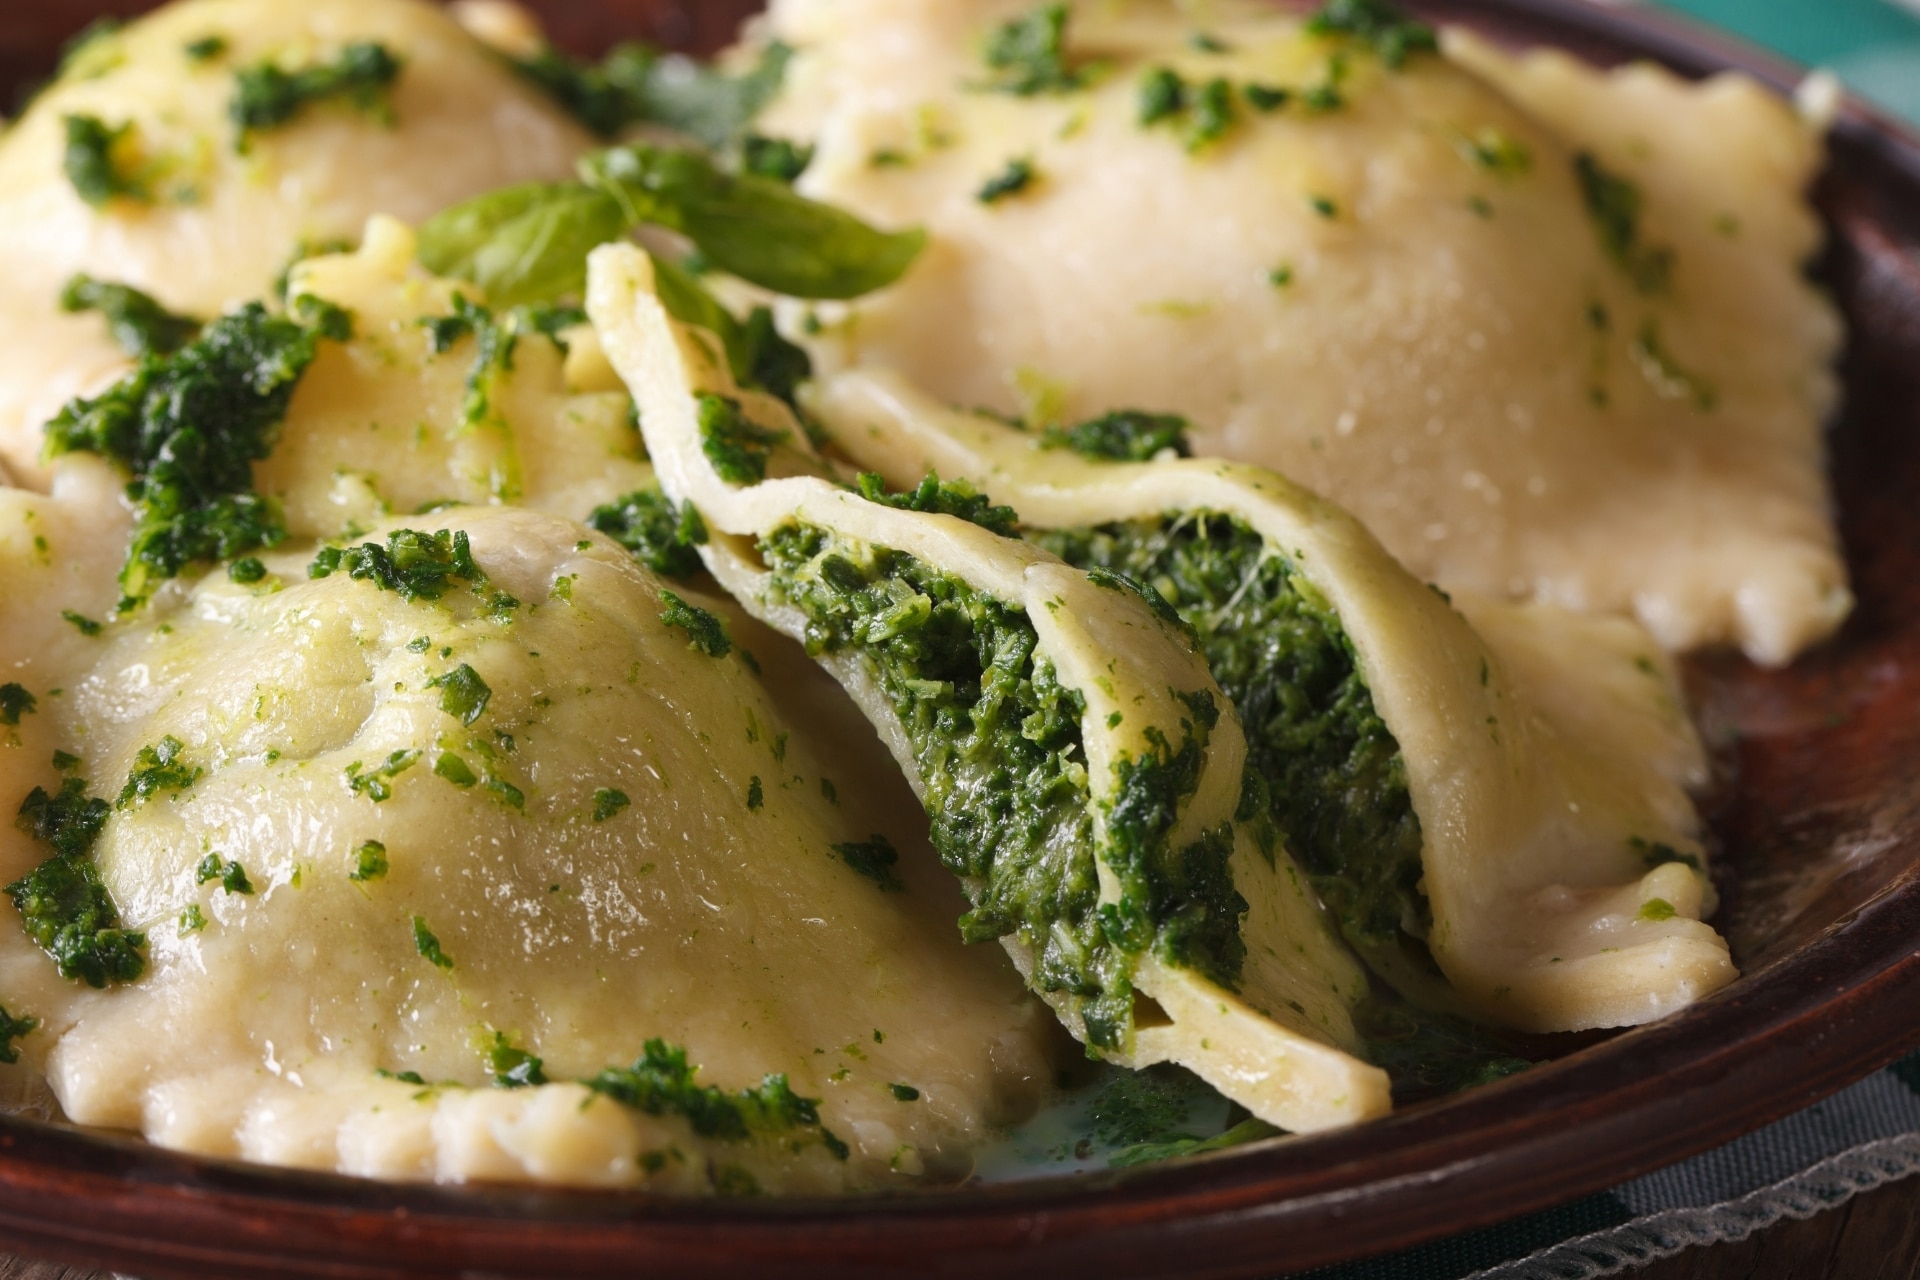 Gluten free ravioli with spinach and ricotta cheese